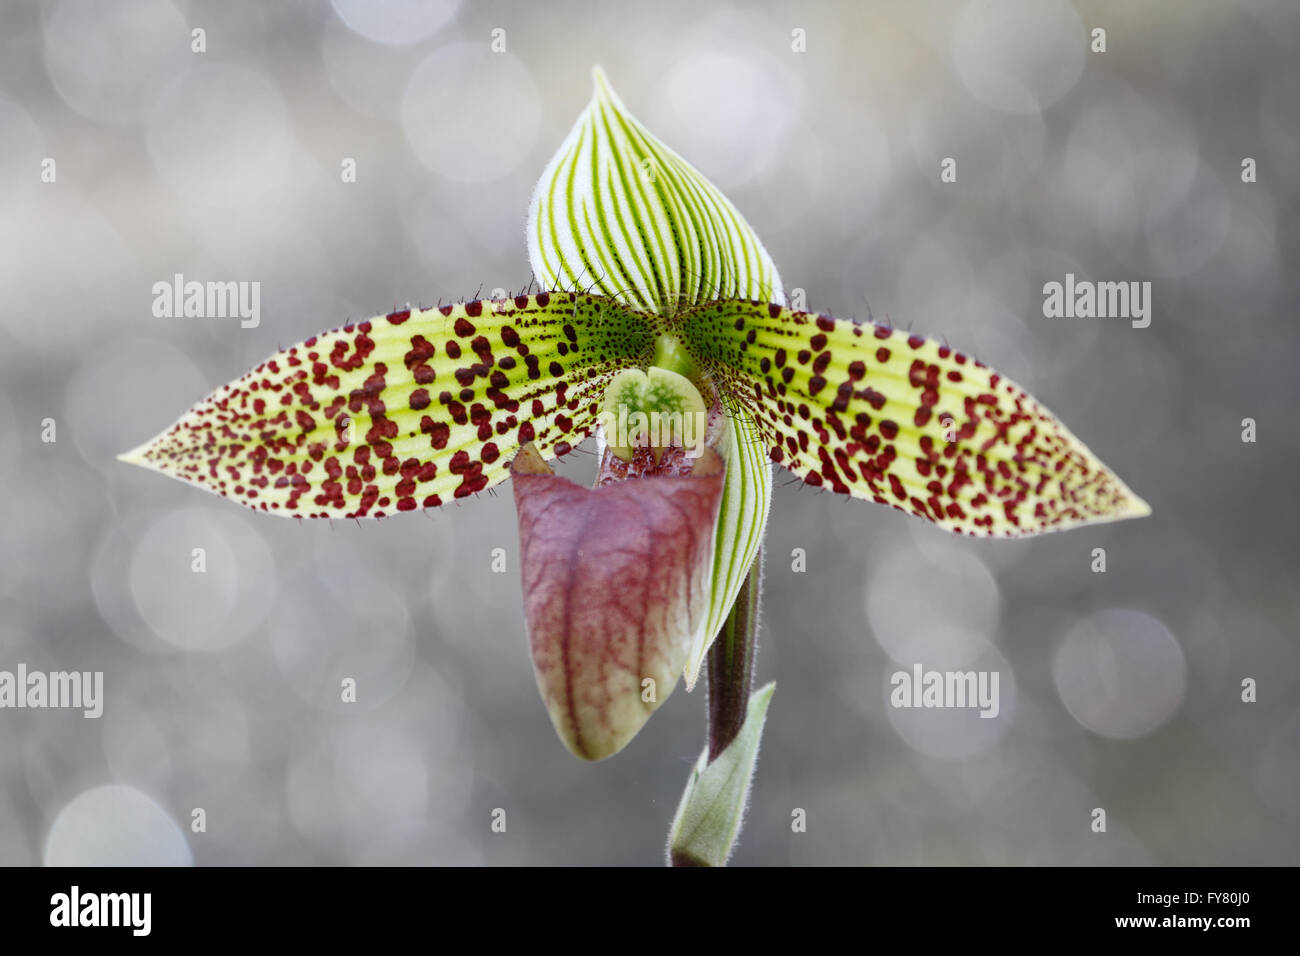 Lady's Slipper orchid from Southeast Asia. Stock Photo